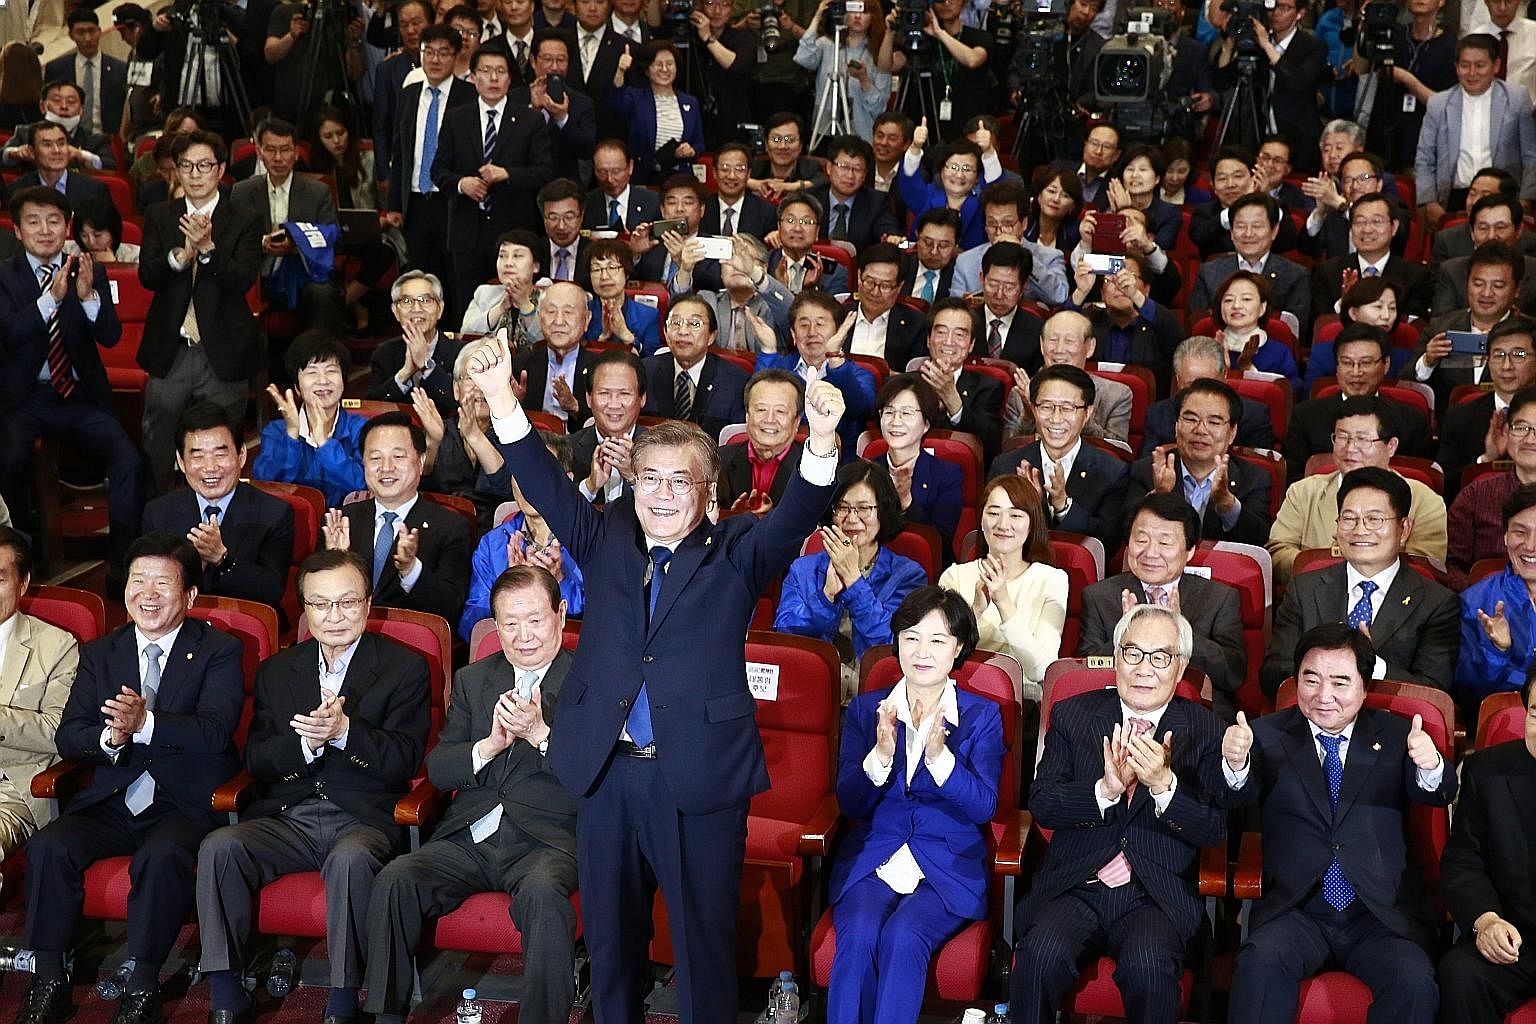 Mr Moon Jae In of the Democratic Party celebrating with supporters at the National Assembly in Seoul, after exit polls showed he would be South Korea's new president. People watching a live broadcast of election coverage in Seoul's Gwanghwamun Square